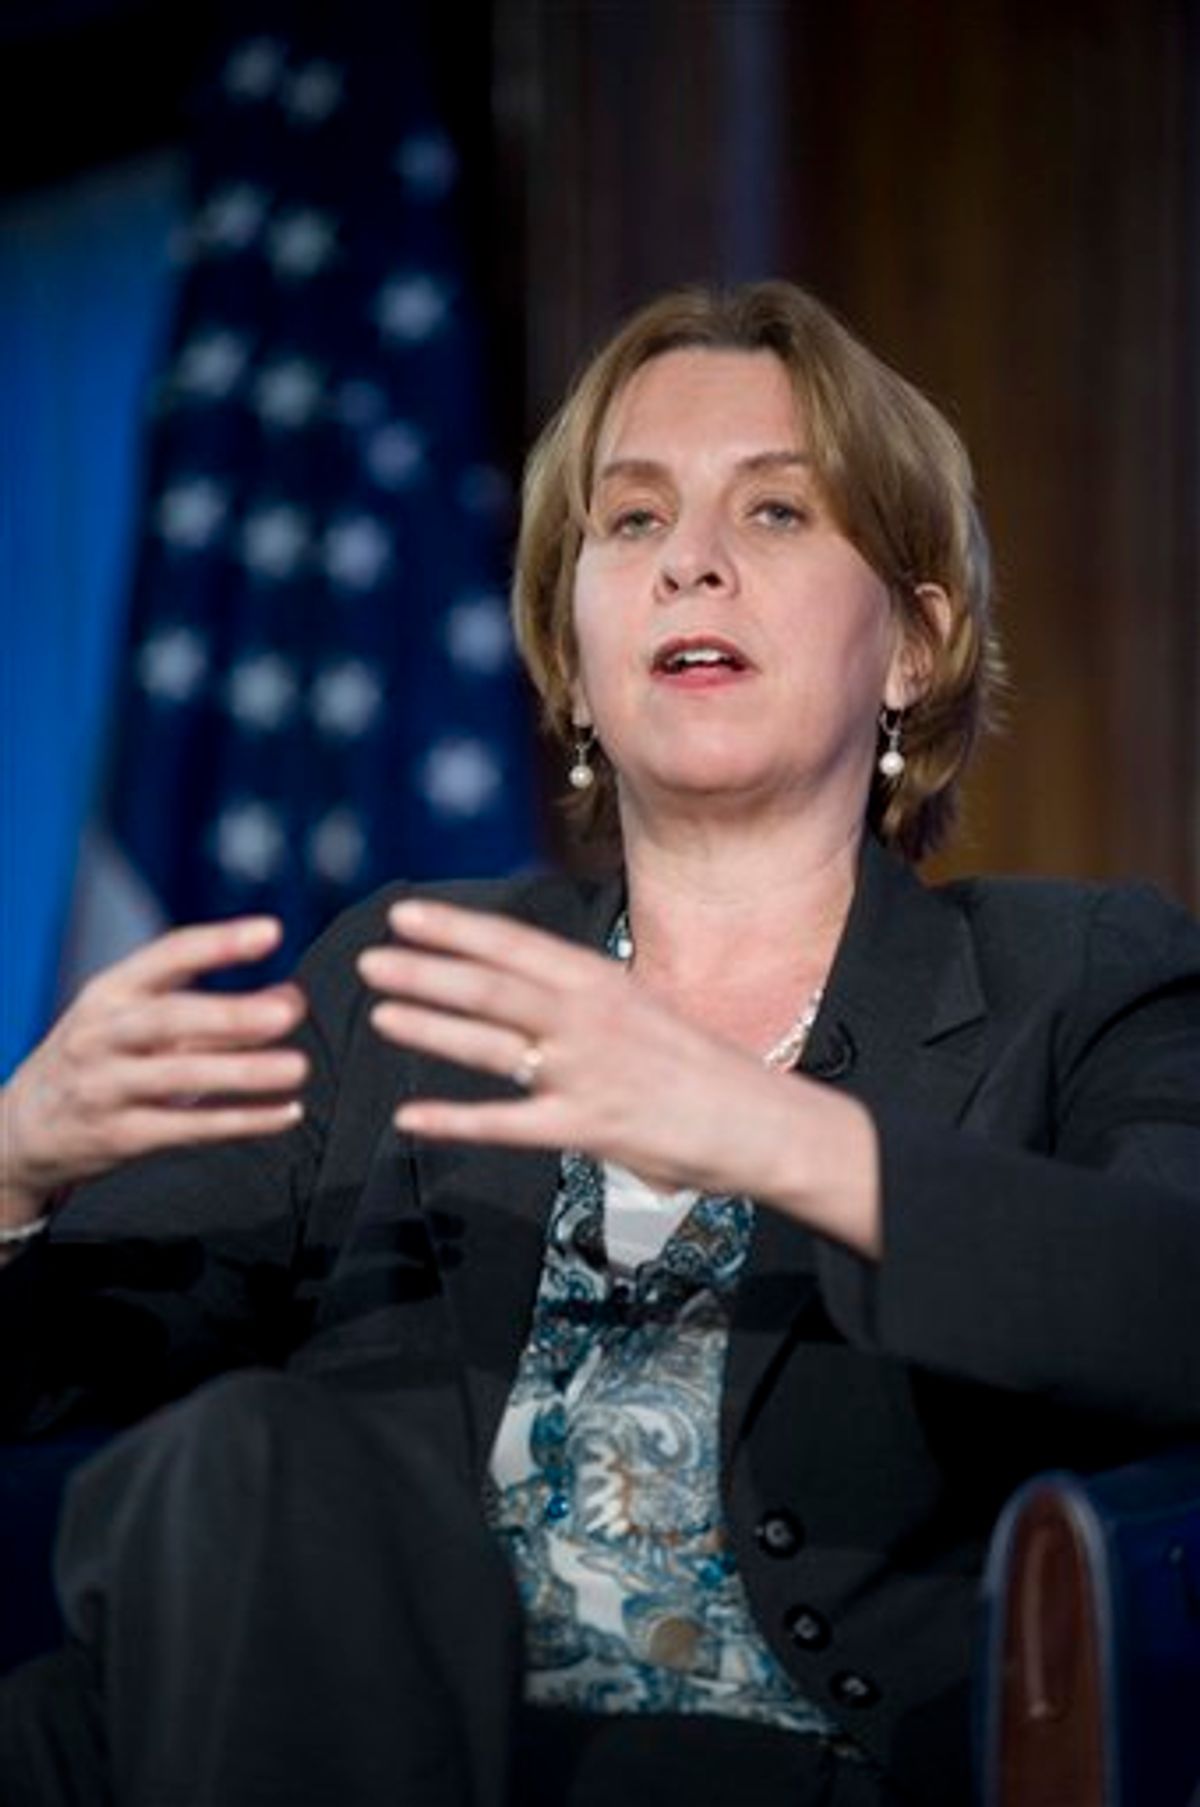 ** FILE ** In this March 24, 2009 file photo, President and CEO of NPR Vivian Schiller appears on The Kalb Report at the National Press Club in Washington.  NPR says CEO Vivian Schiller resigns in aftermath of fundraiser's remarks on hidden video.  (AP Photo/Kevin Wolf)   (AP)